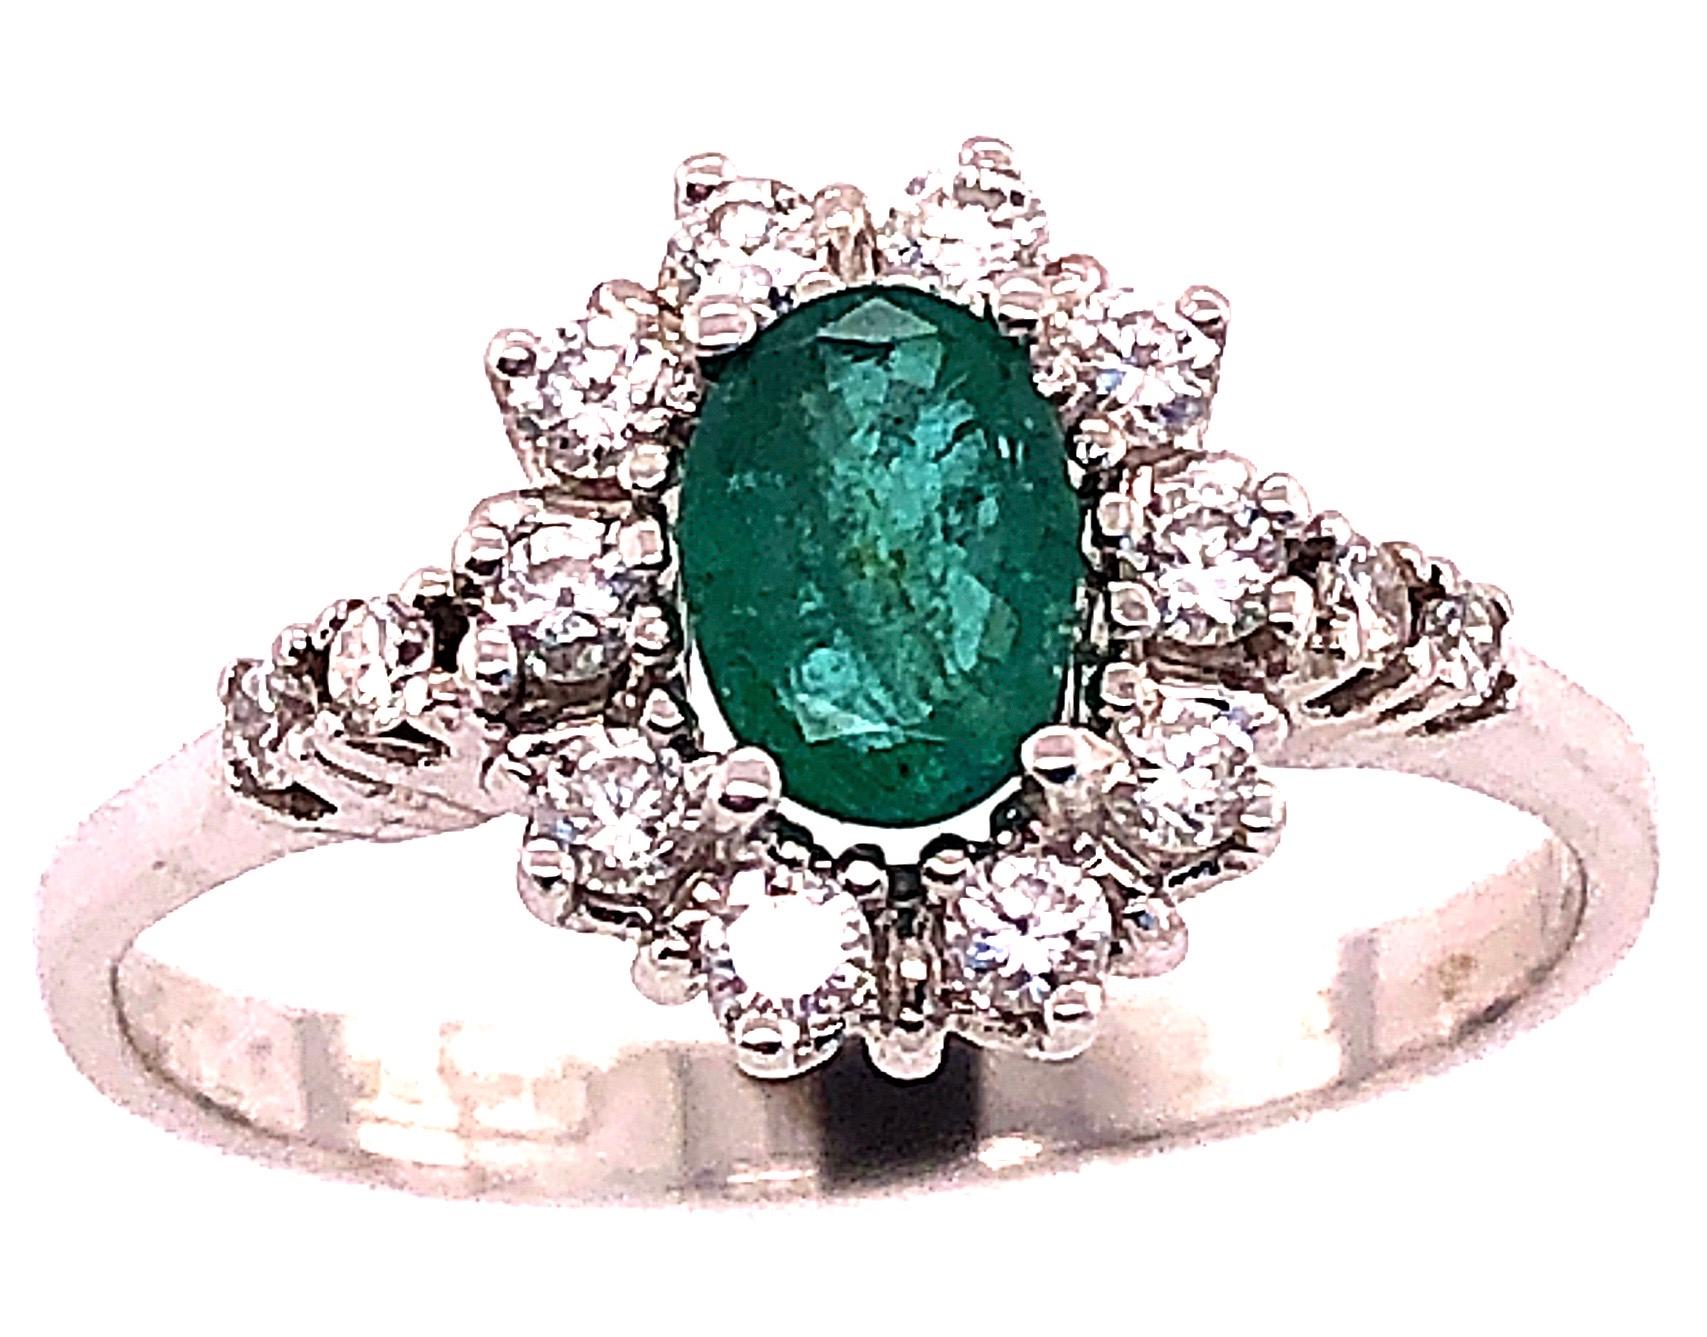 18 Karat White Gold Fashion Wempe Emerald and Diamond Ring Size 5.25.
0.75 total diamond weight.
2.20 grams total weight.
9.66 ring height.
 Wempe Stamped.
This item is resizable however we do not provide this service. 
